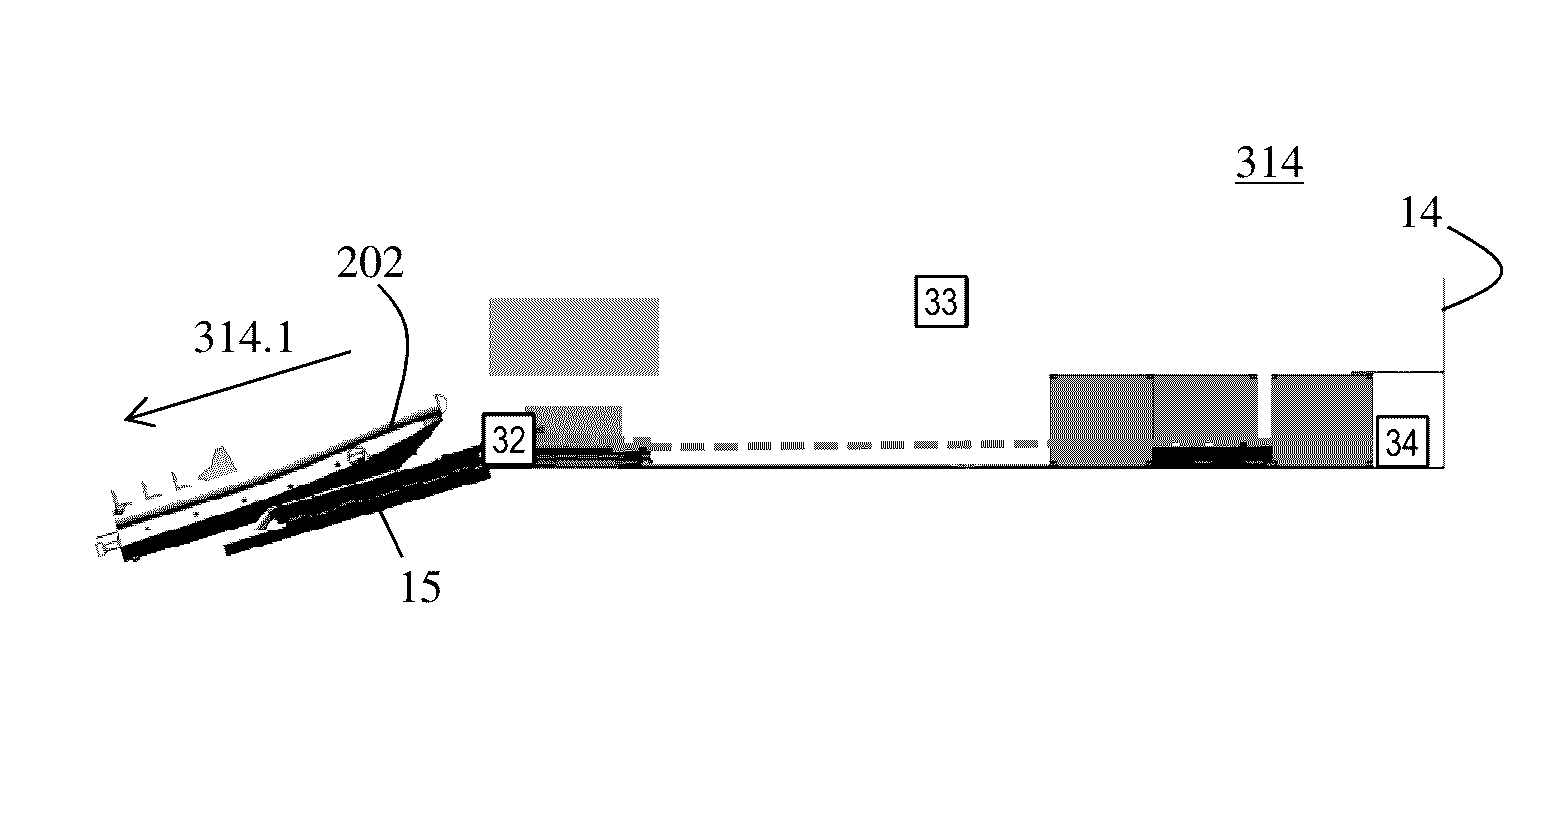 Ship-based waterborne vehicle launch, recovery, and handling system